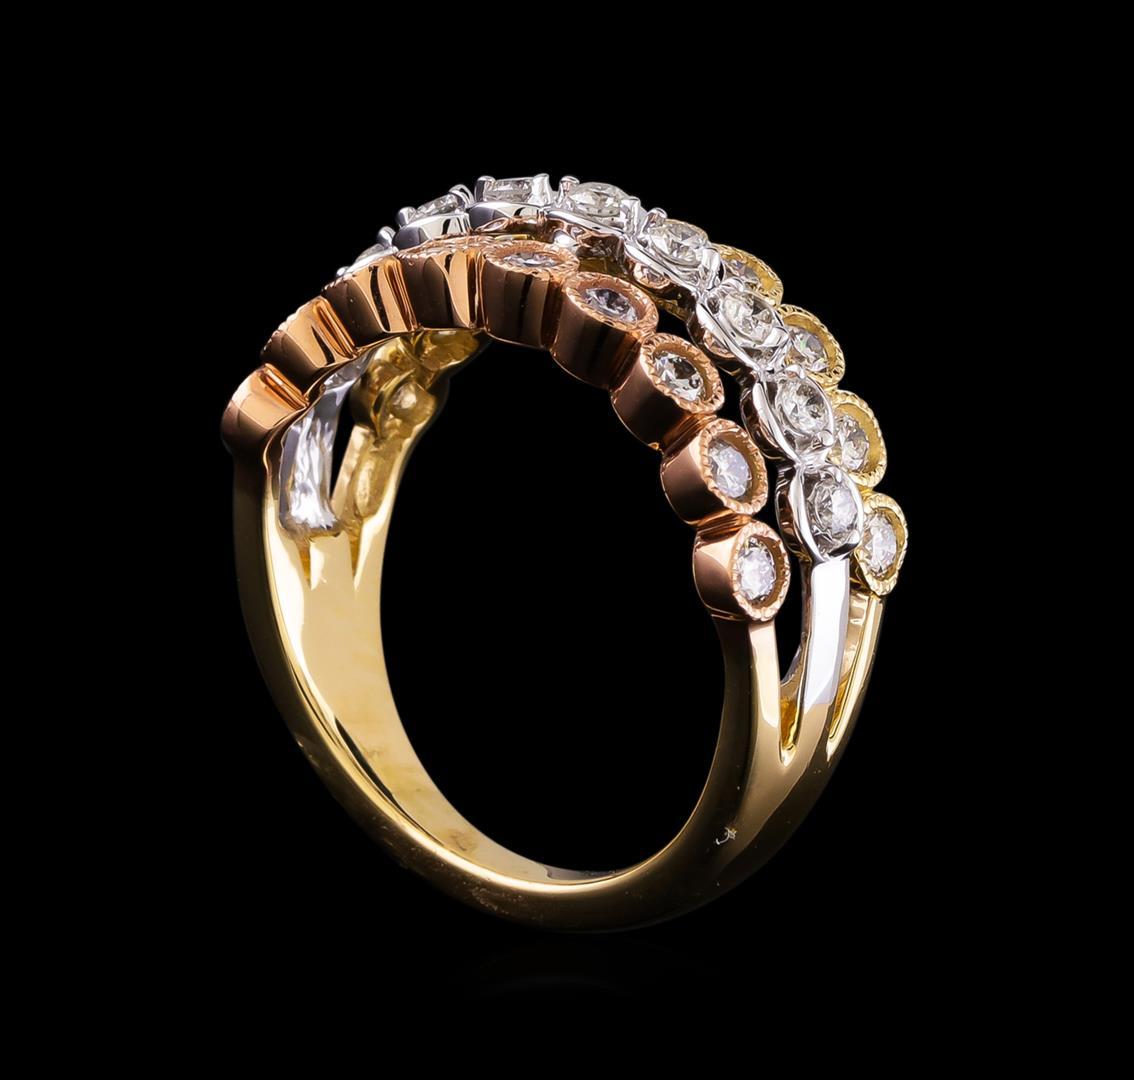 1.05 ctw Diamond Ring - 14KT Yellow, White, And Rose Gold